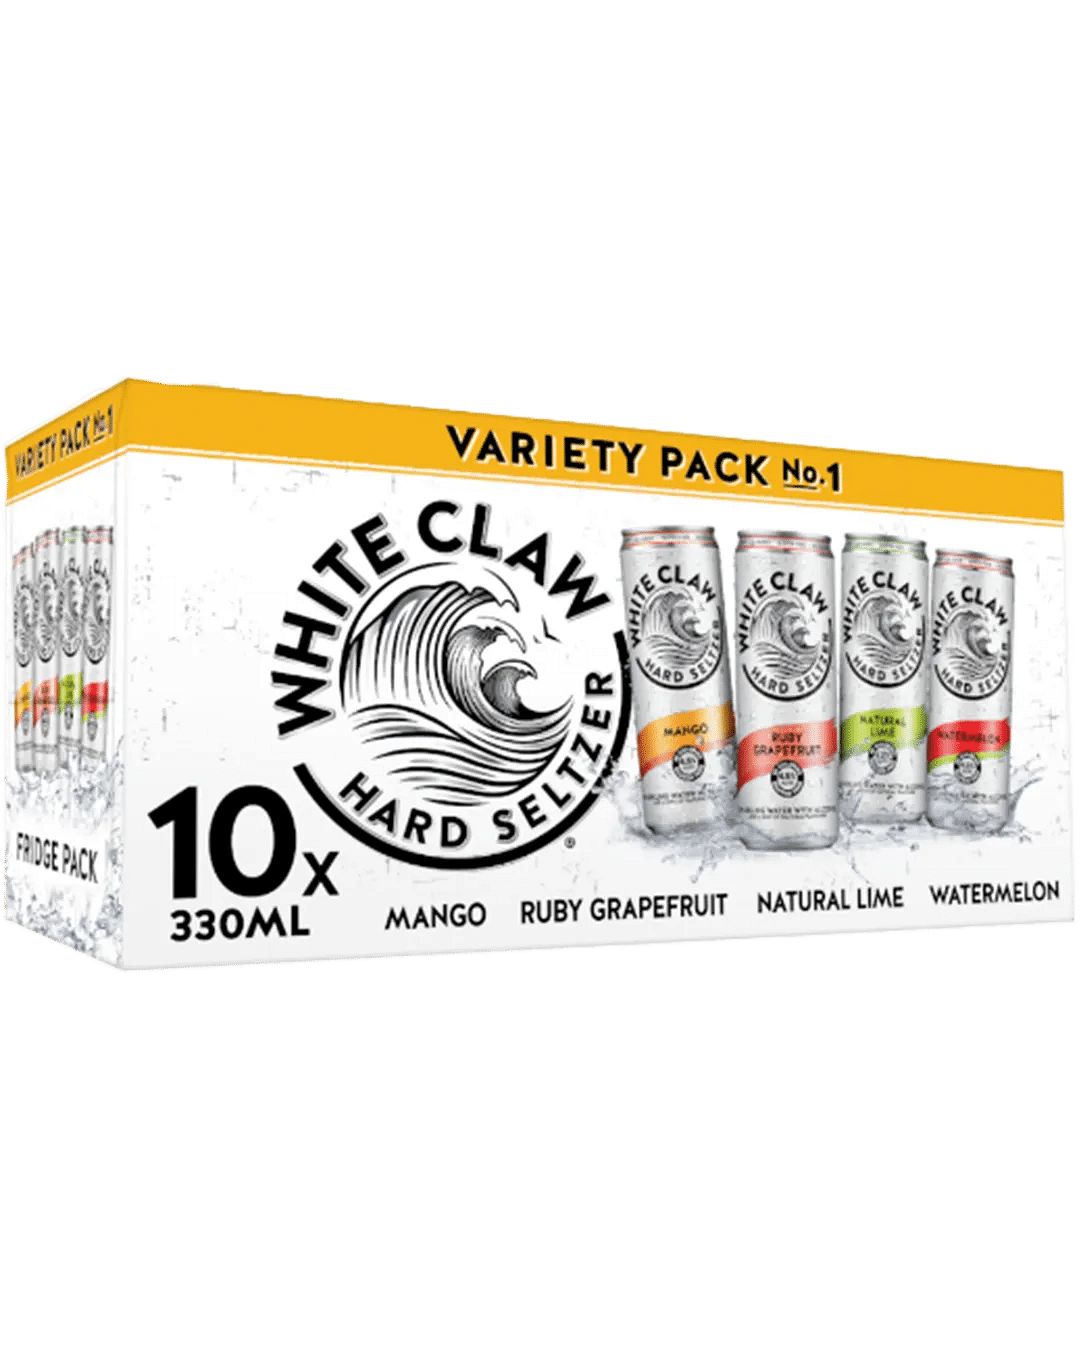 White Claw Seltzer Variety Pack